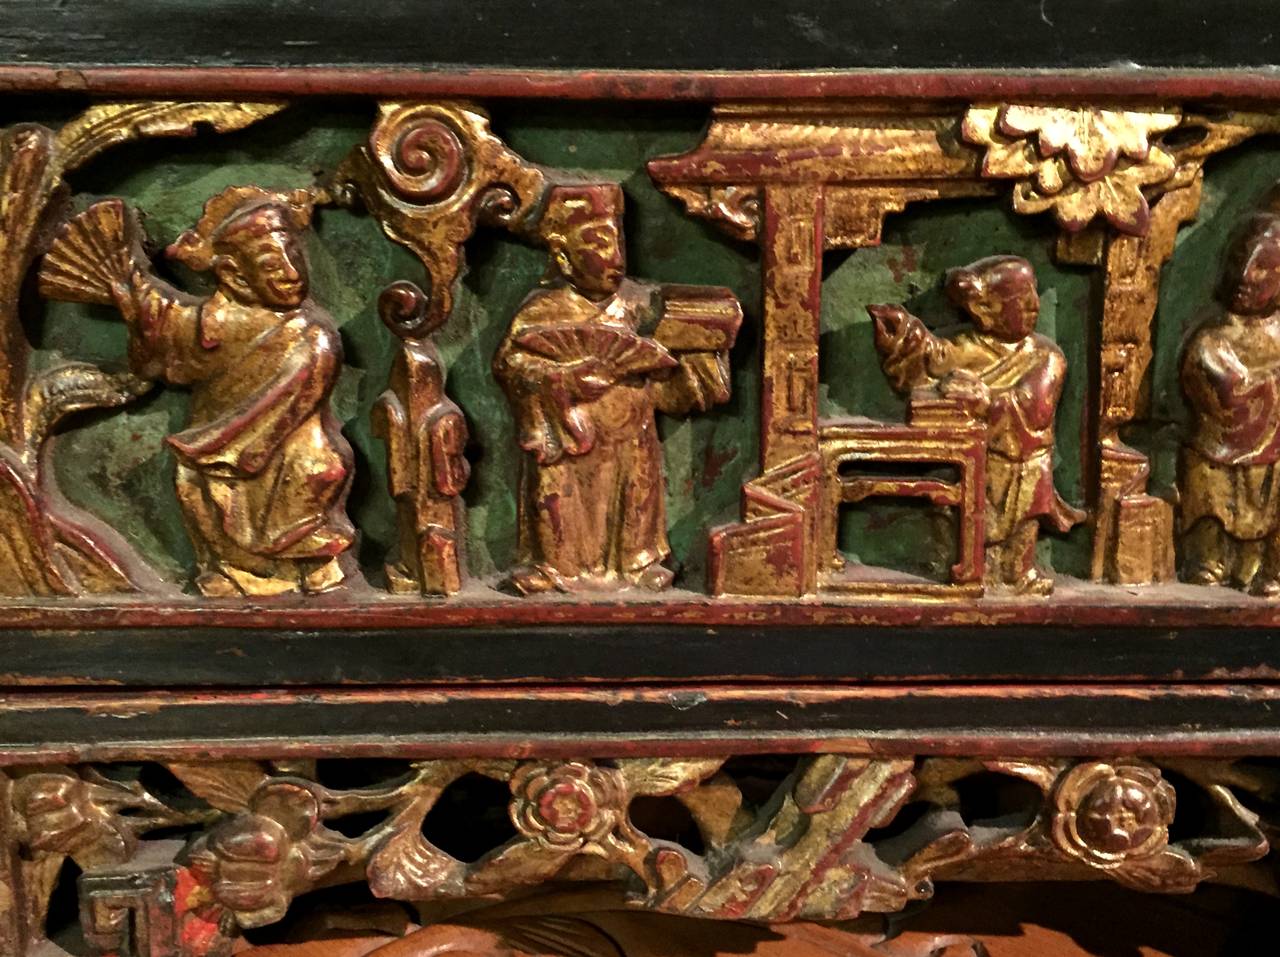 Rare, beautiful Box has an elaborately carved and gilded cover. Carvings depict a scholar's life with books and opera. Pomegranates and peaches on the ends symbolize family and long life. The cover is carved from a single block of wood. The base